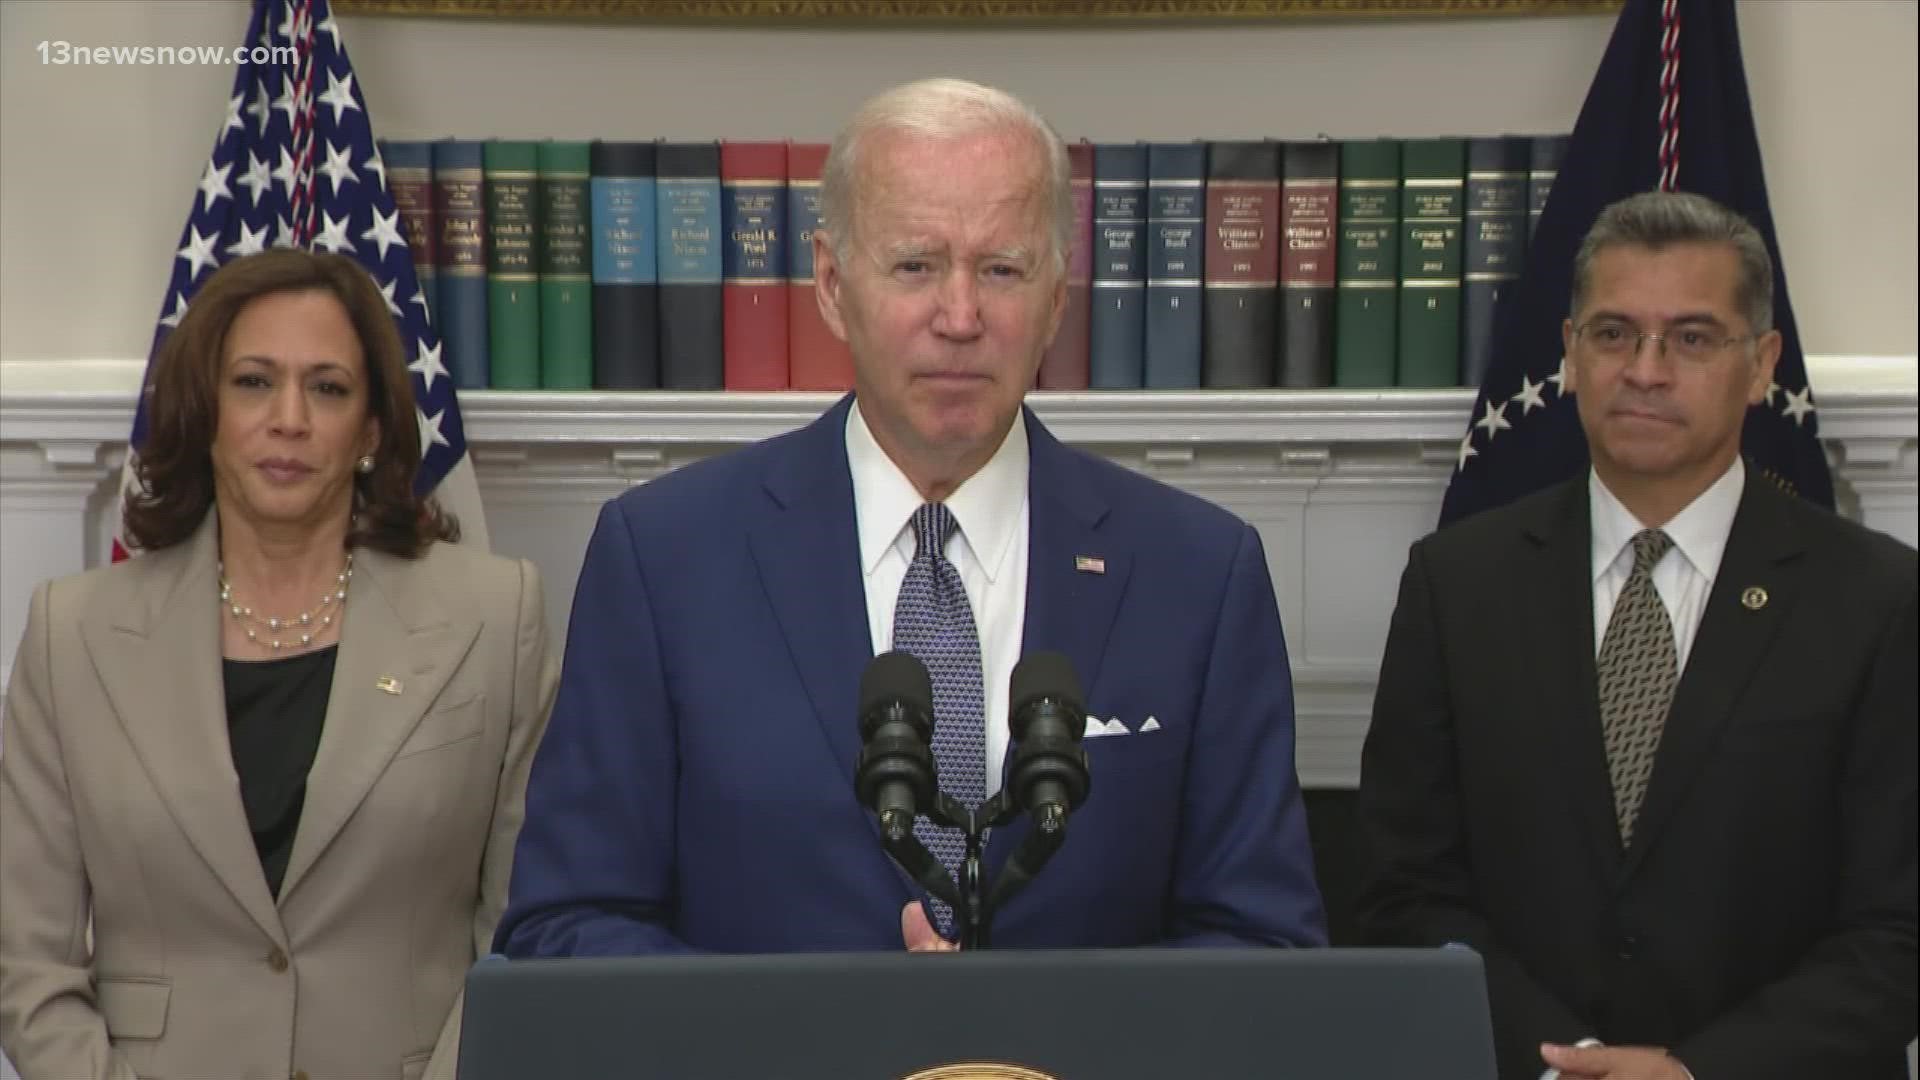 President Joe Biden is taking executive action to protect access to abortion, as he faces mounting pressure from fellow Democrats to be more forceful on the subject.